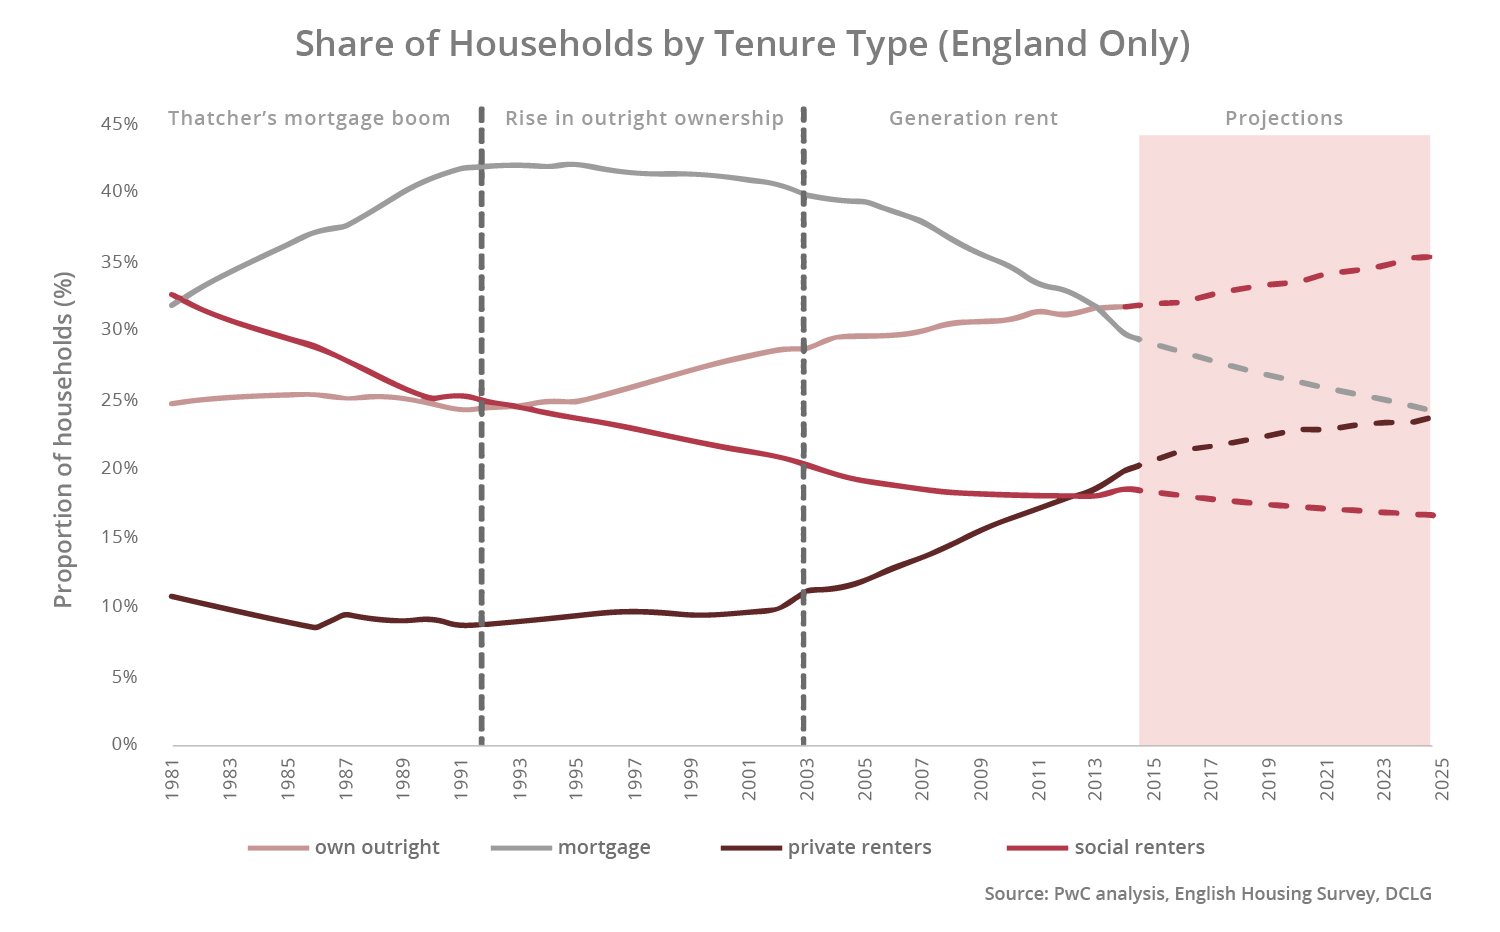 Share of Households by Tenure Type since 1981 (England Only)